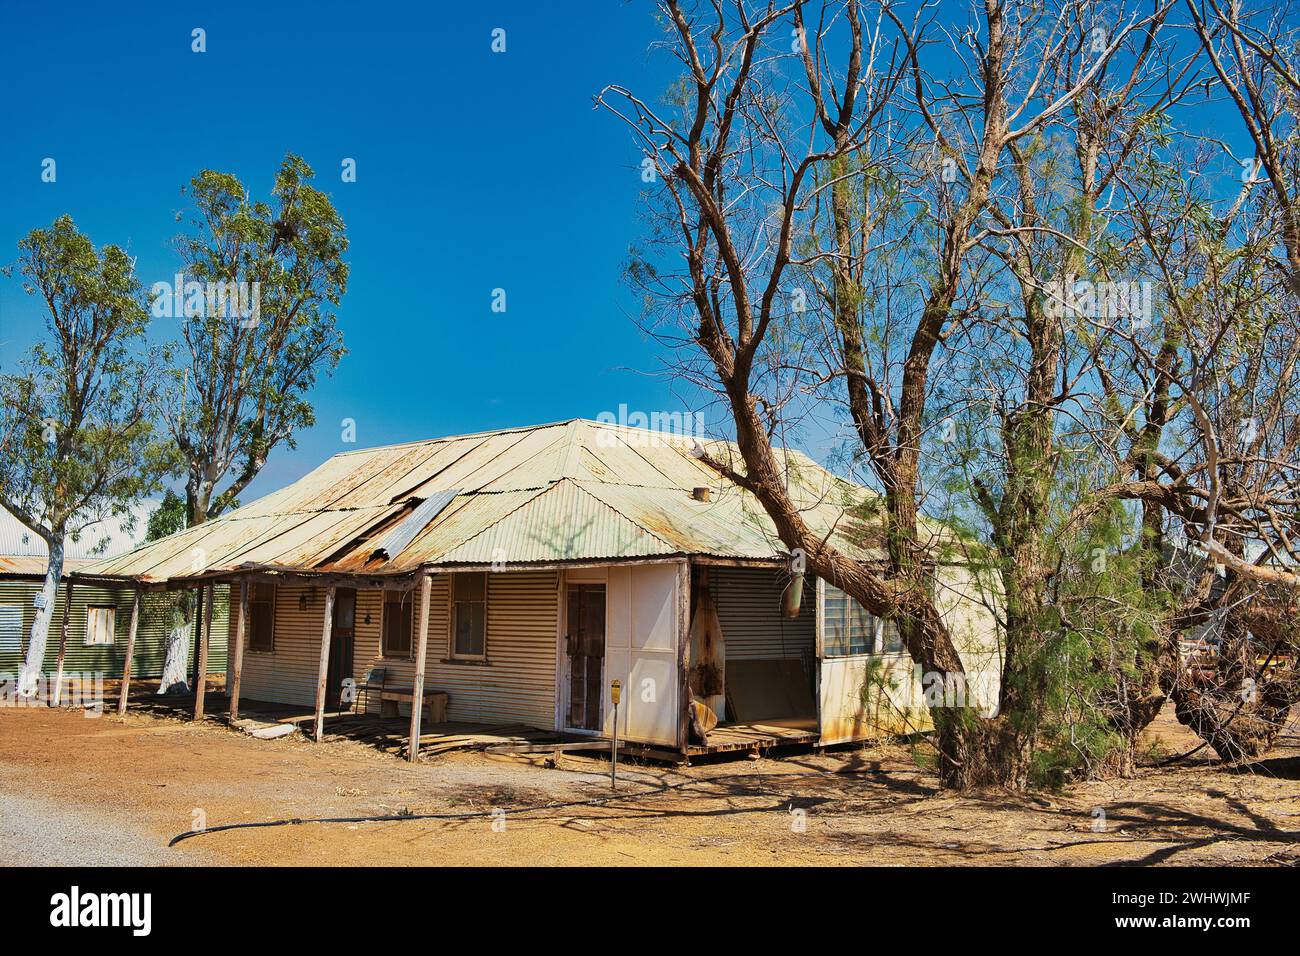 Abandoned old house, made of corrugated iron, in the Australian outback. Pindar, Western Australia Stock Photo